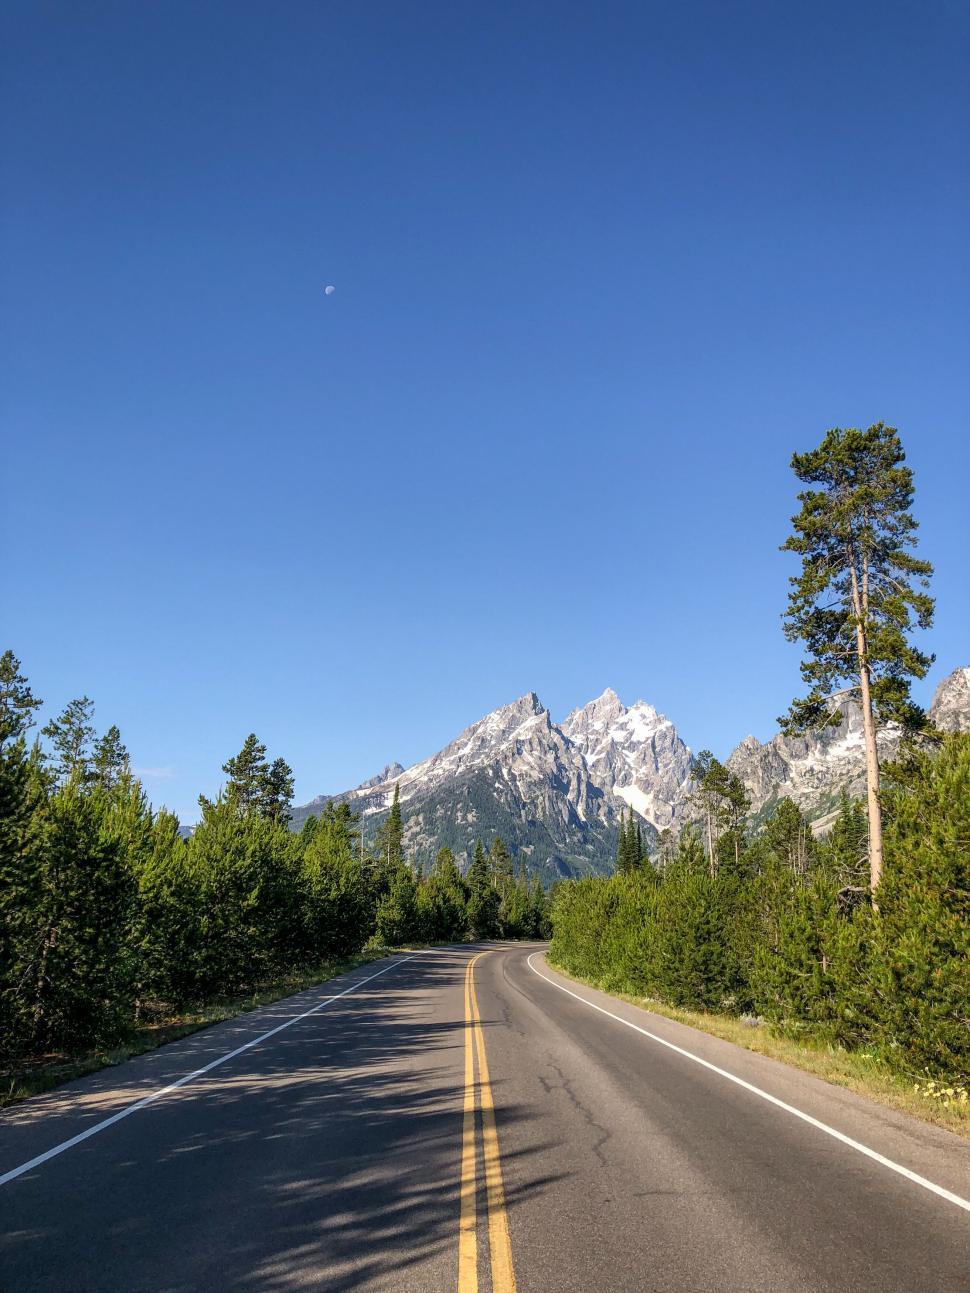 Free Image of Mountain view from a winding road 